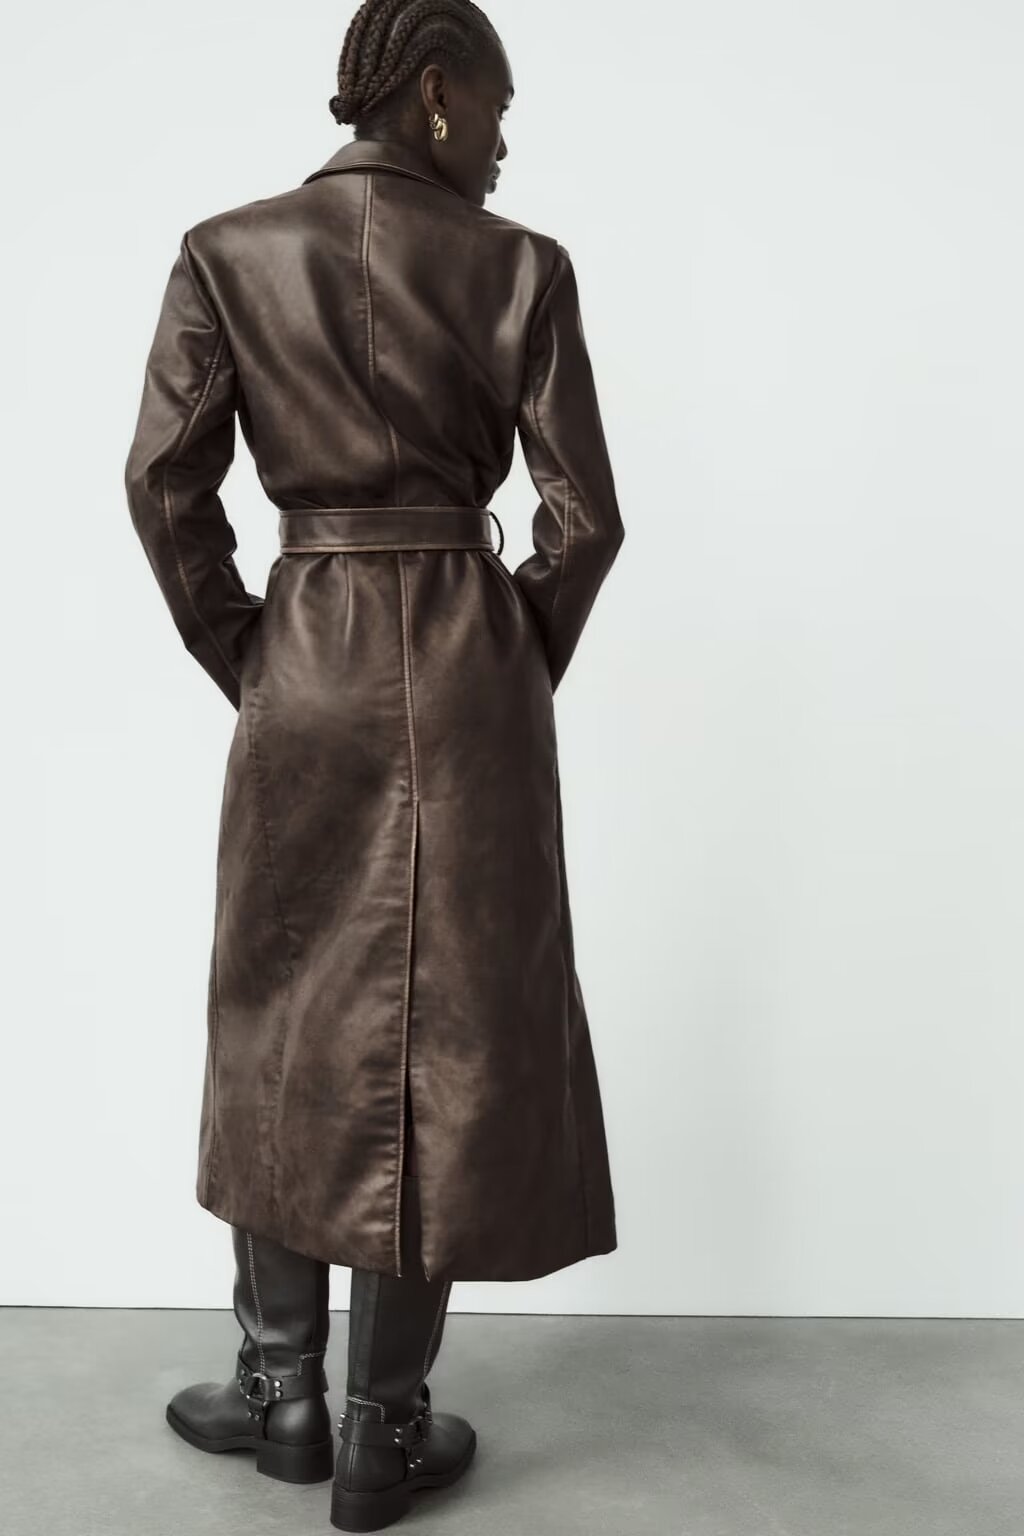 Coat: Distressed Effect Leather